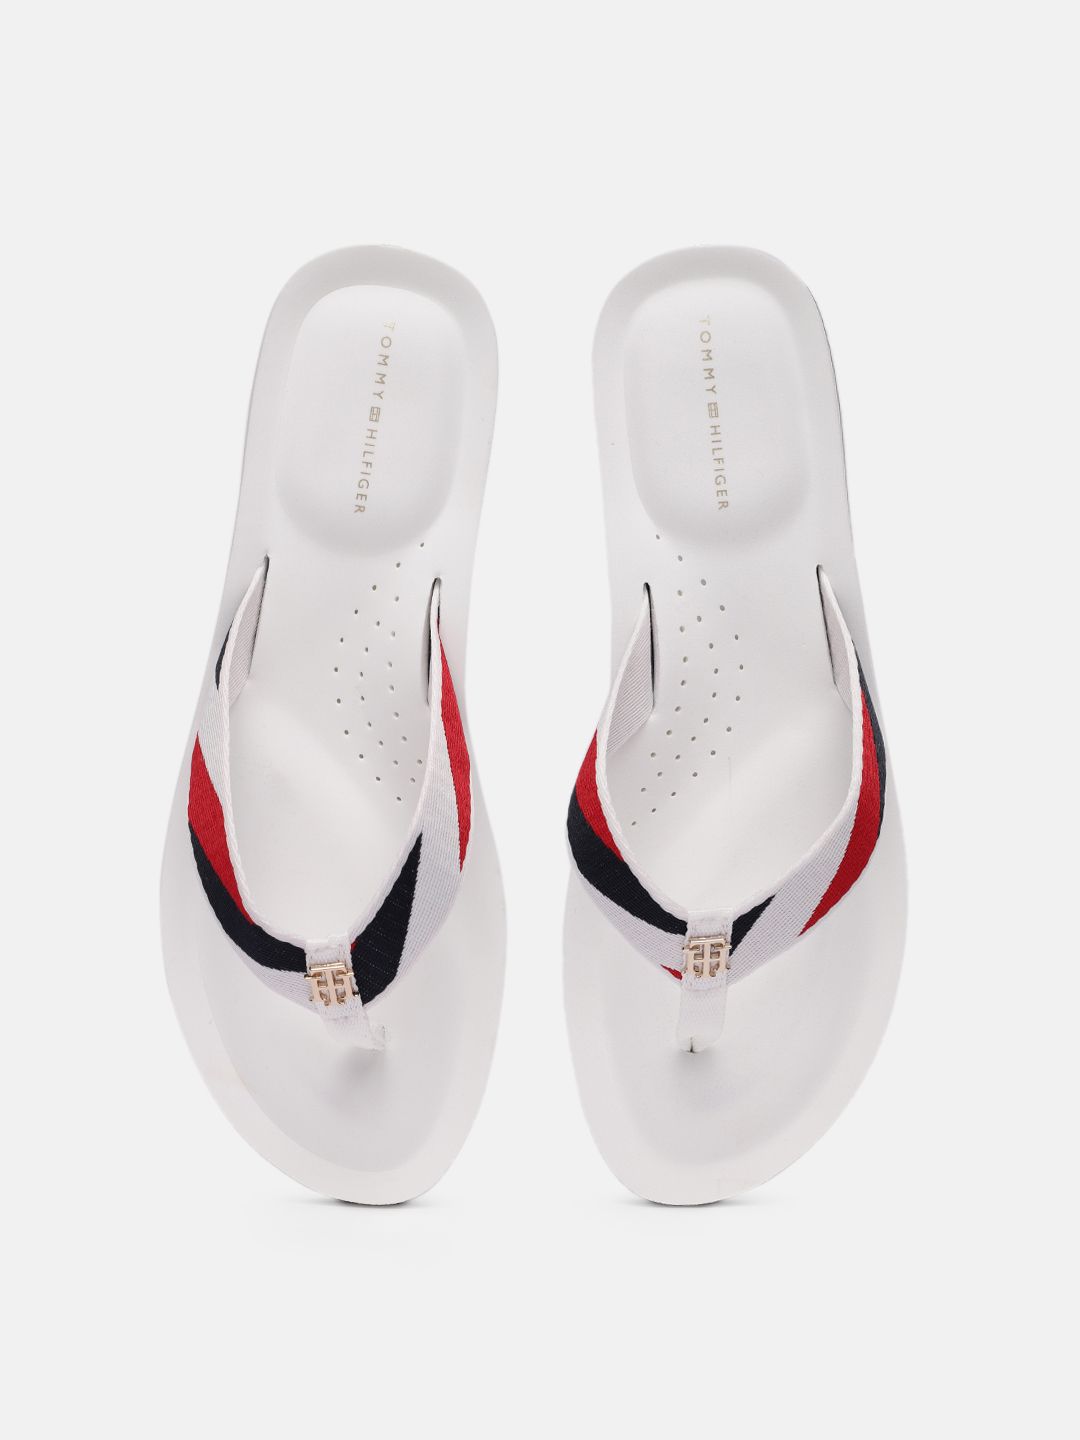 Tommy Hilfiger Women White & Navy Blue Thong Flip-Flops Price in India